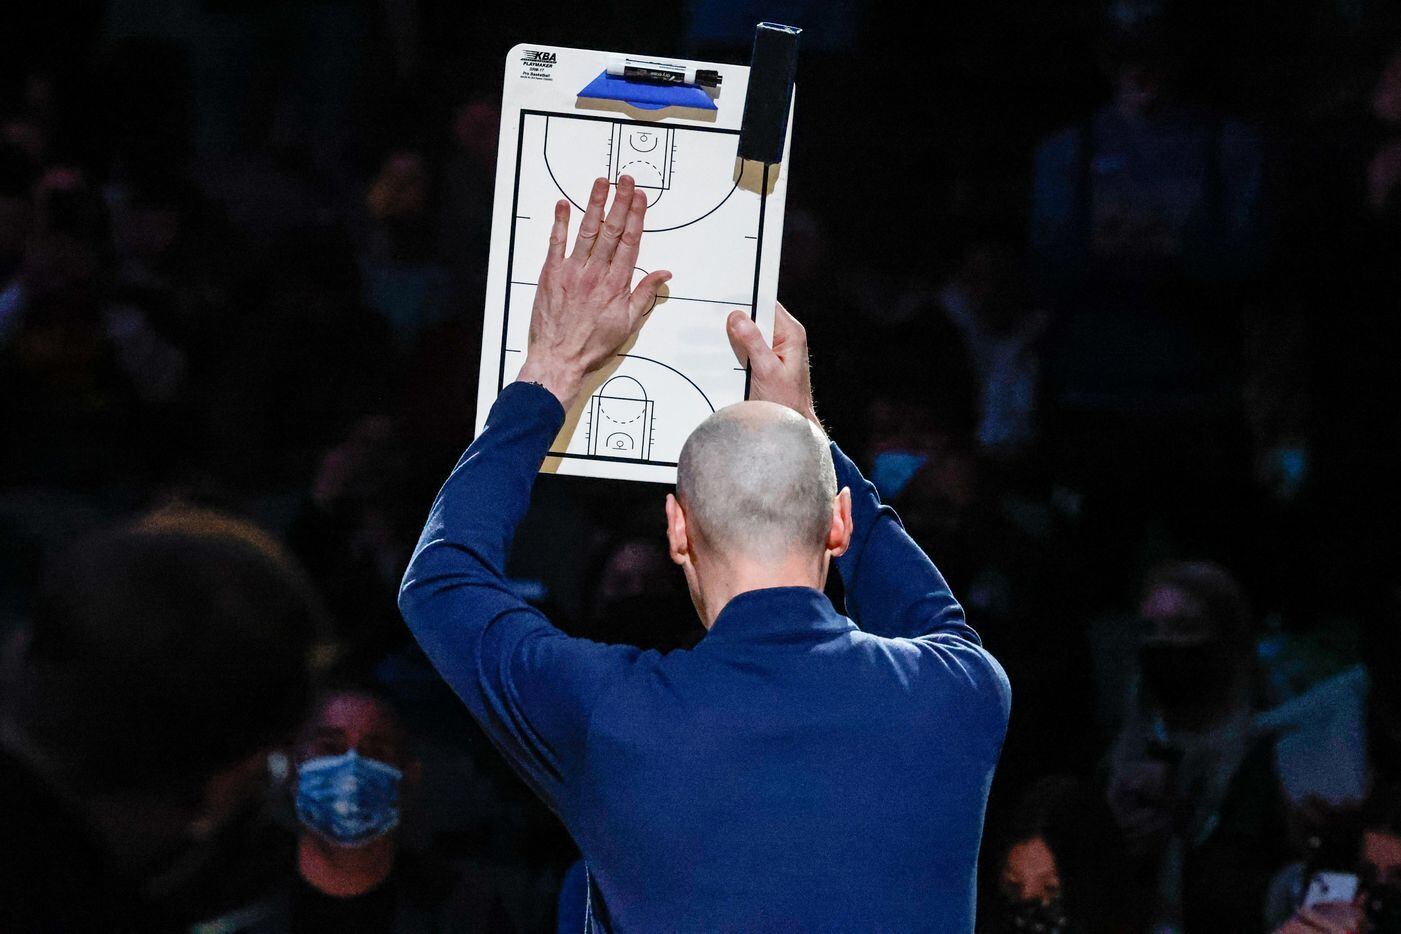 Indiana Pacers coach Rick Carlisle during before a game against the Dallas Mavericks at the American Airlines Center in Dallas on Saturday, January 29, 2022.